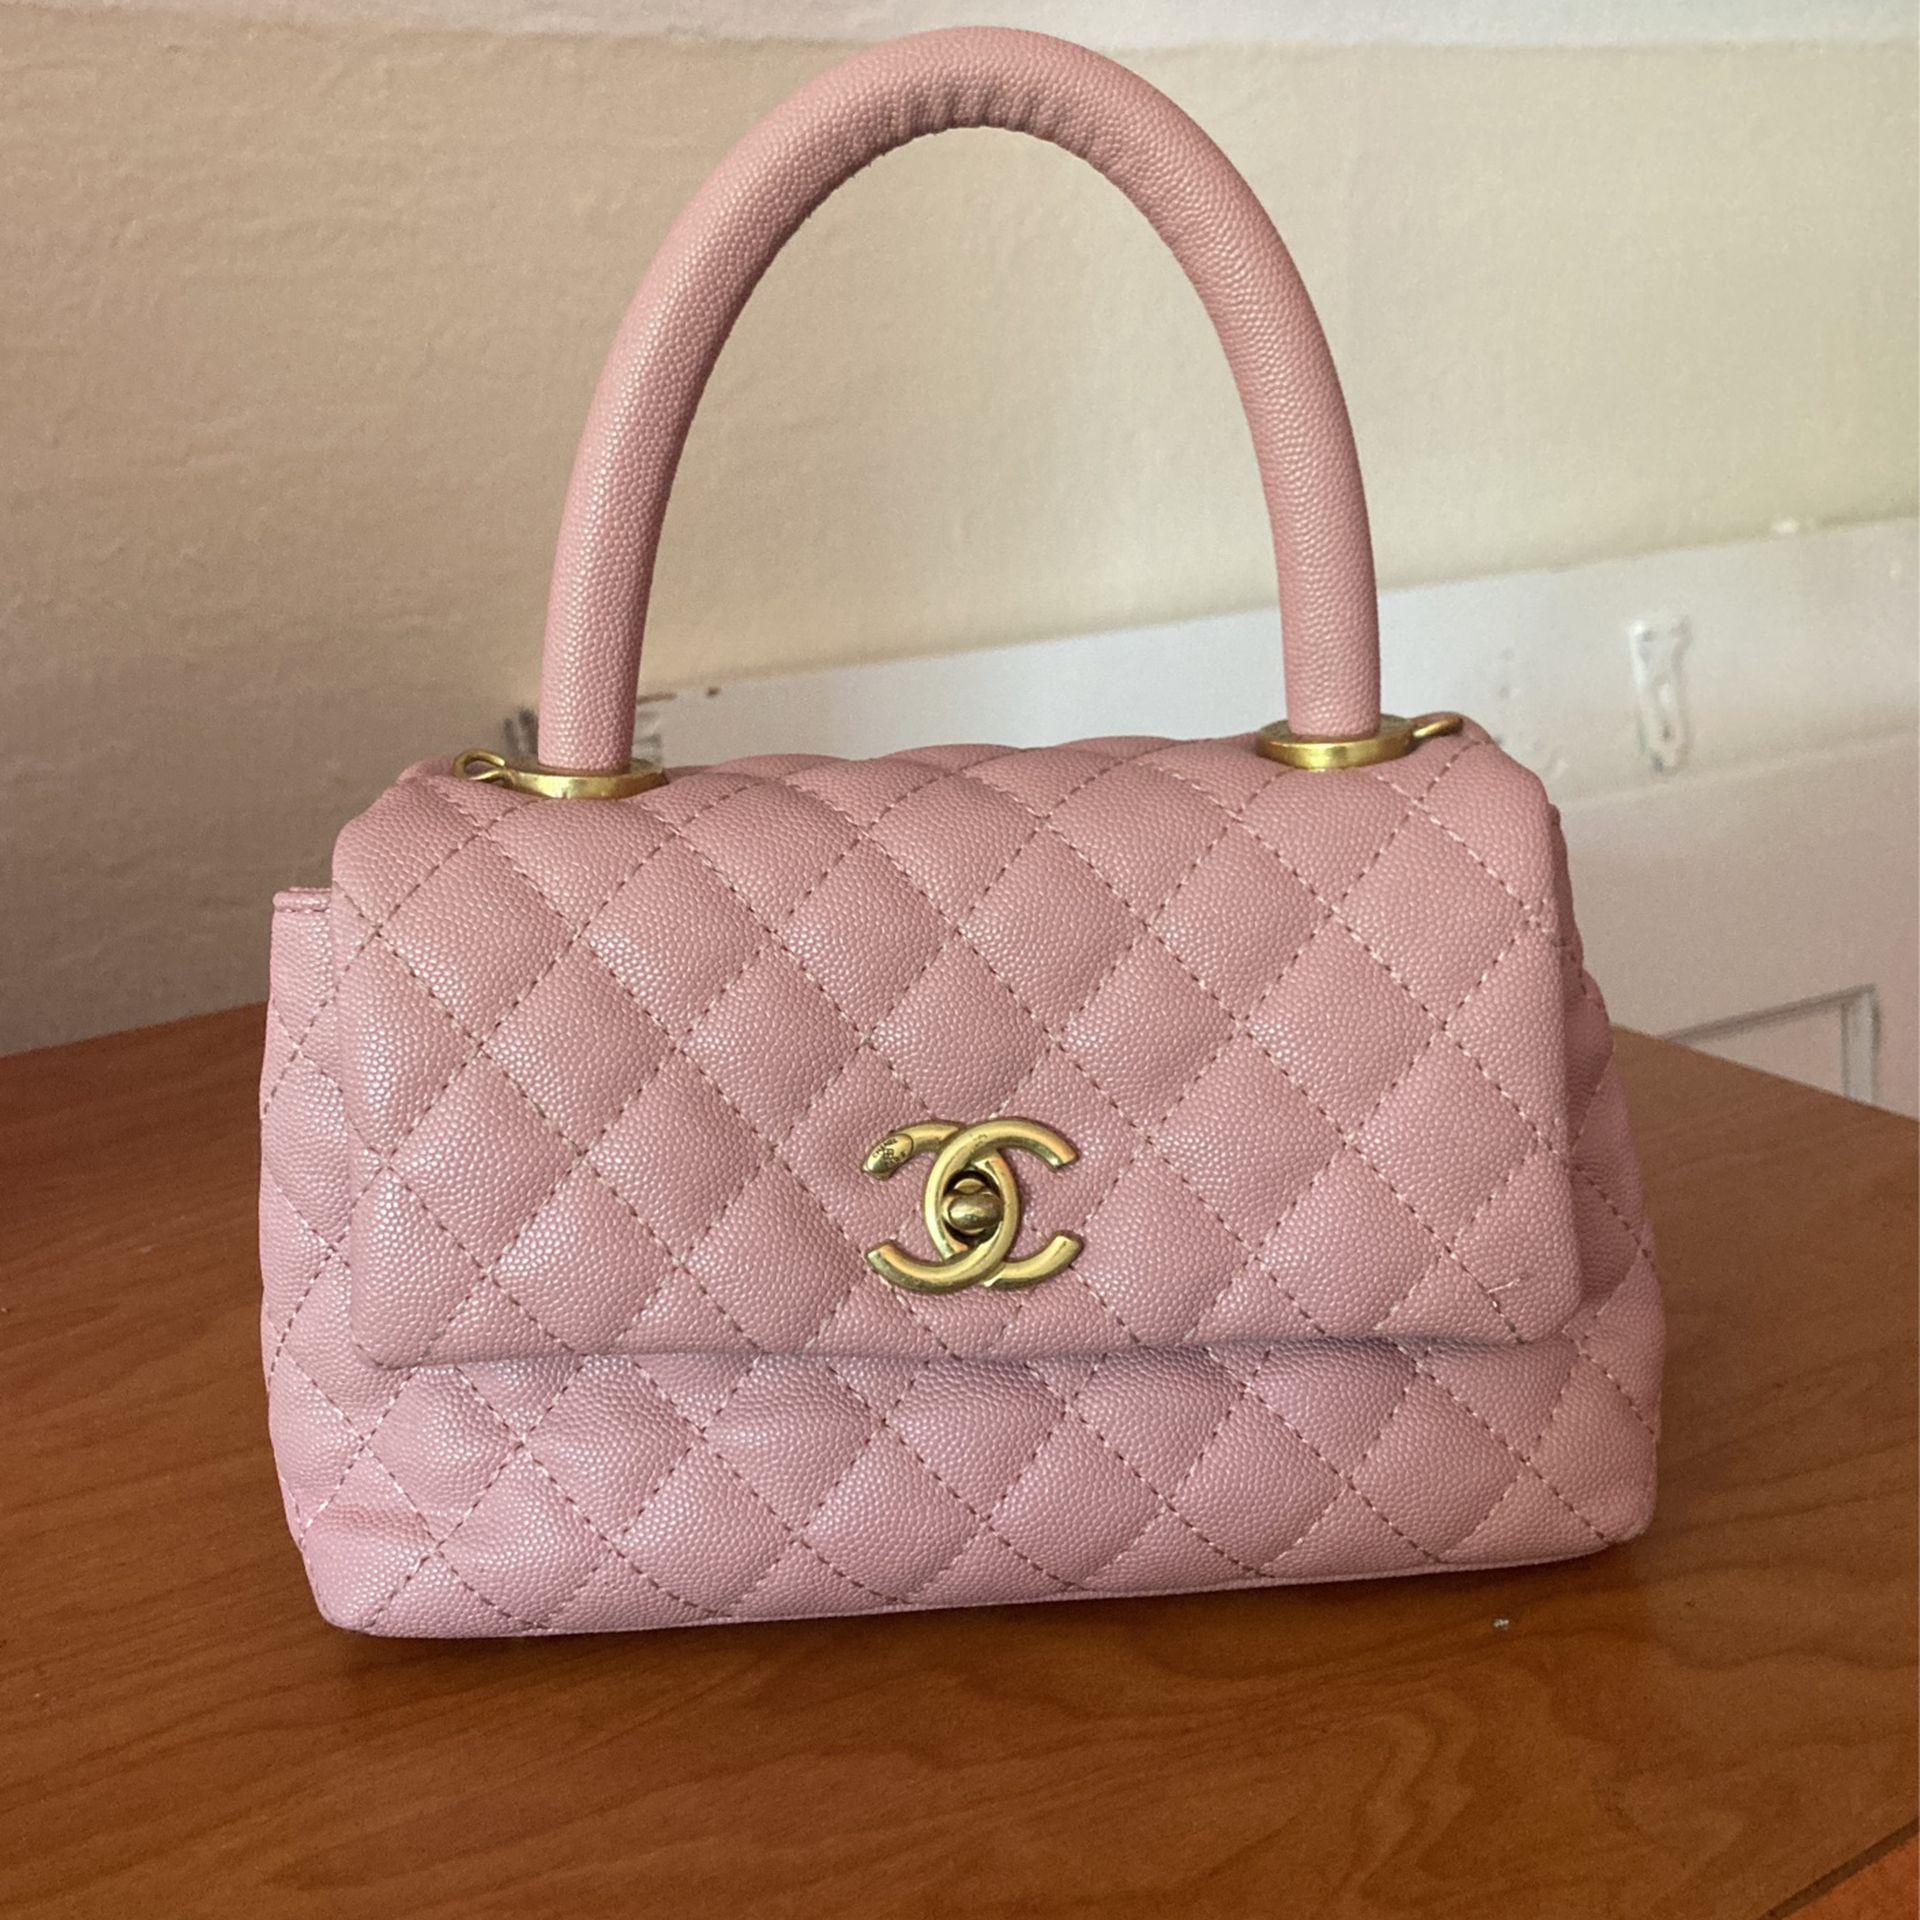 Chanel Purse for Sale in Cleveland, OH - OfferUp